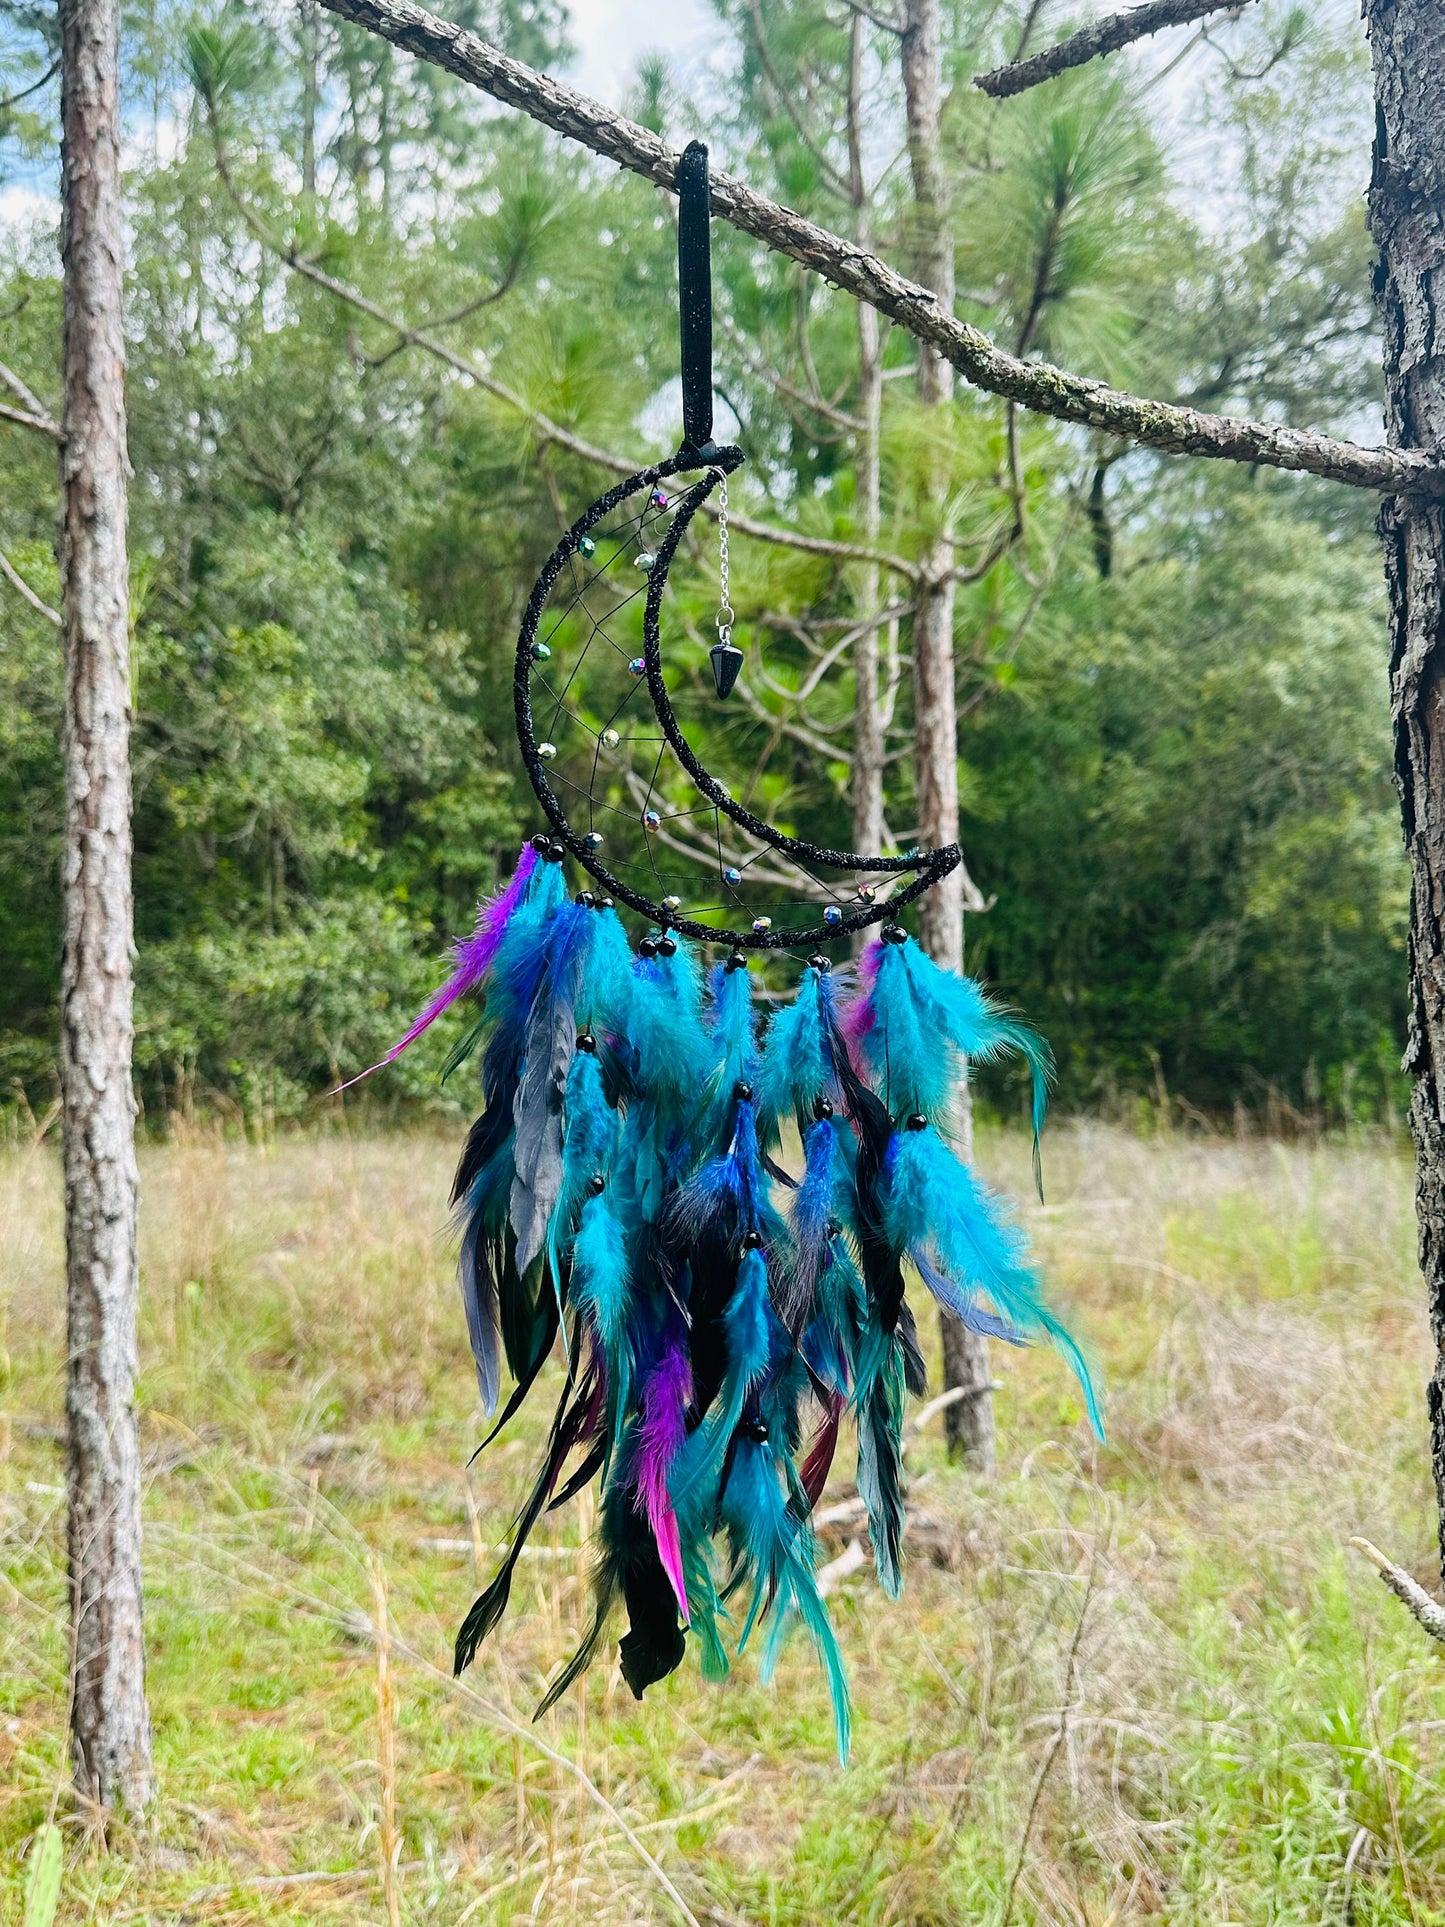 Medium Wall Hanging Crescent Moon Dream Catcher with Black Purple Green Blue Feathers and Charm, Modern Boho Style Home Decor -- Quick Ship!